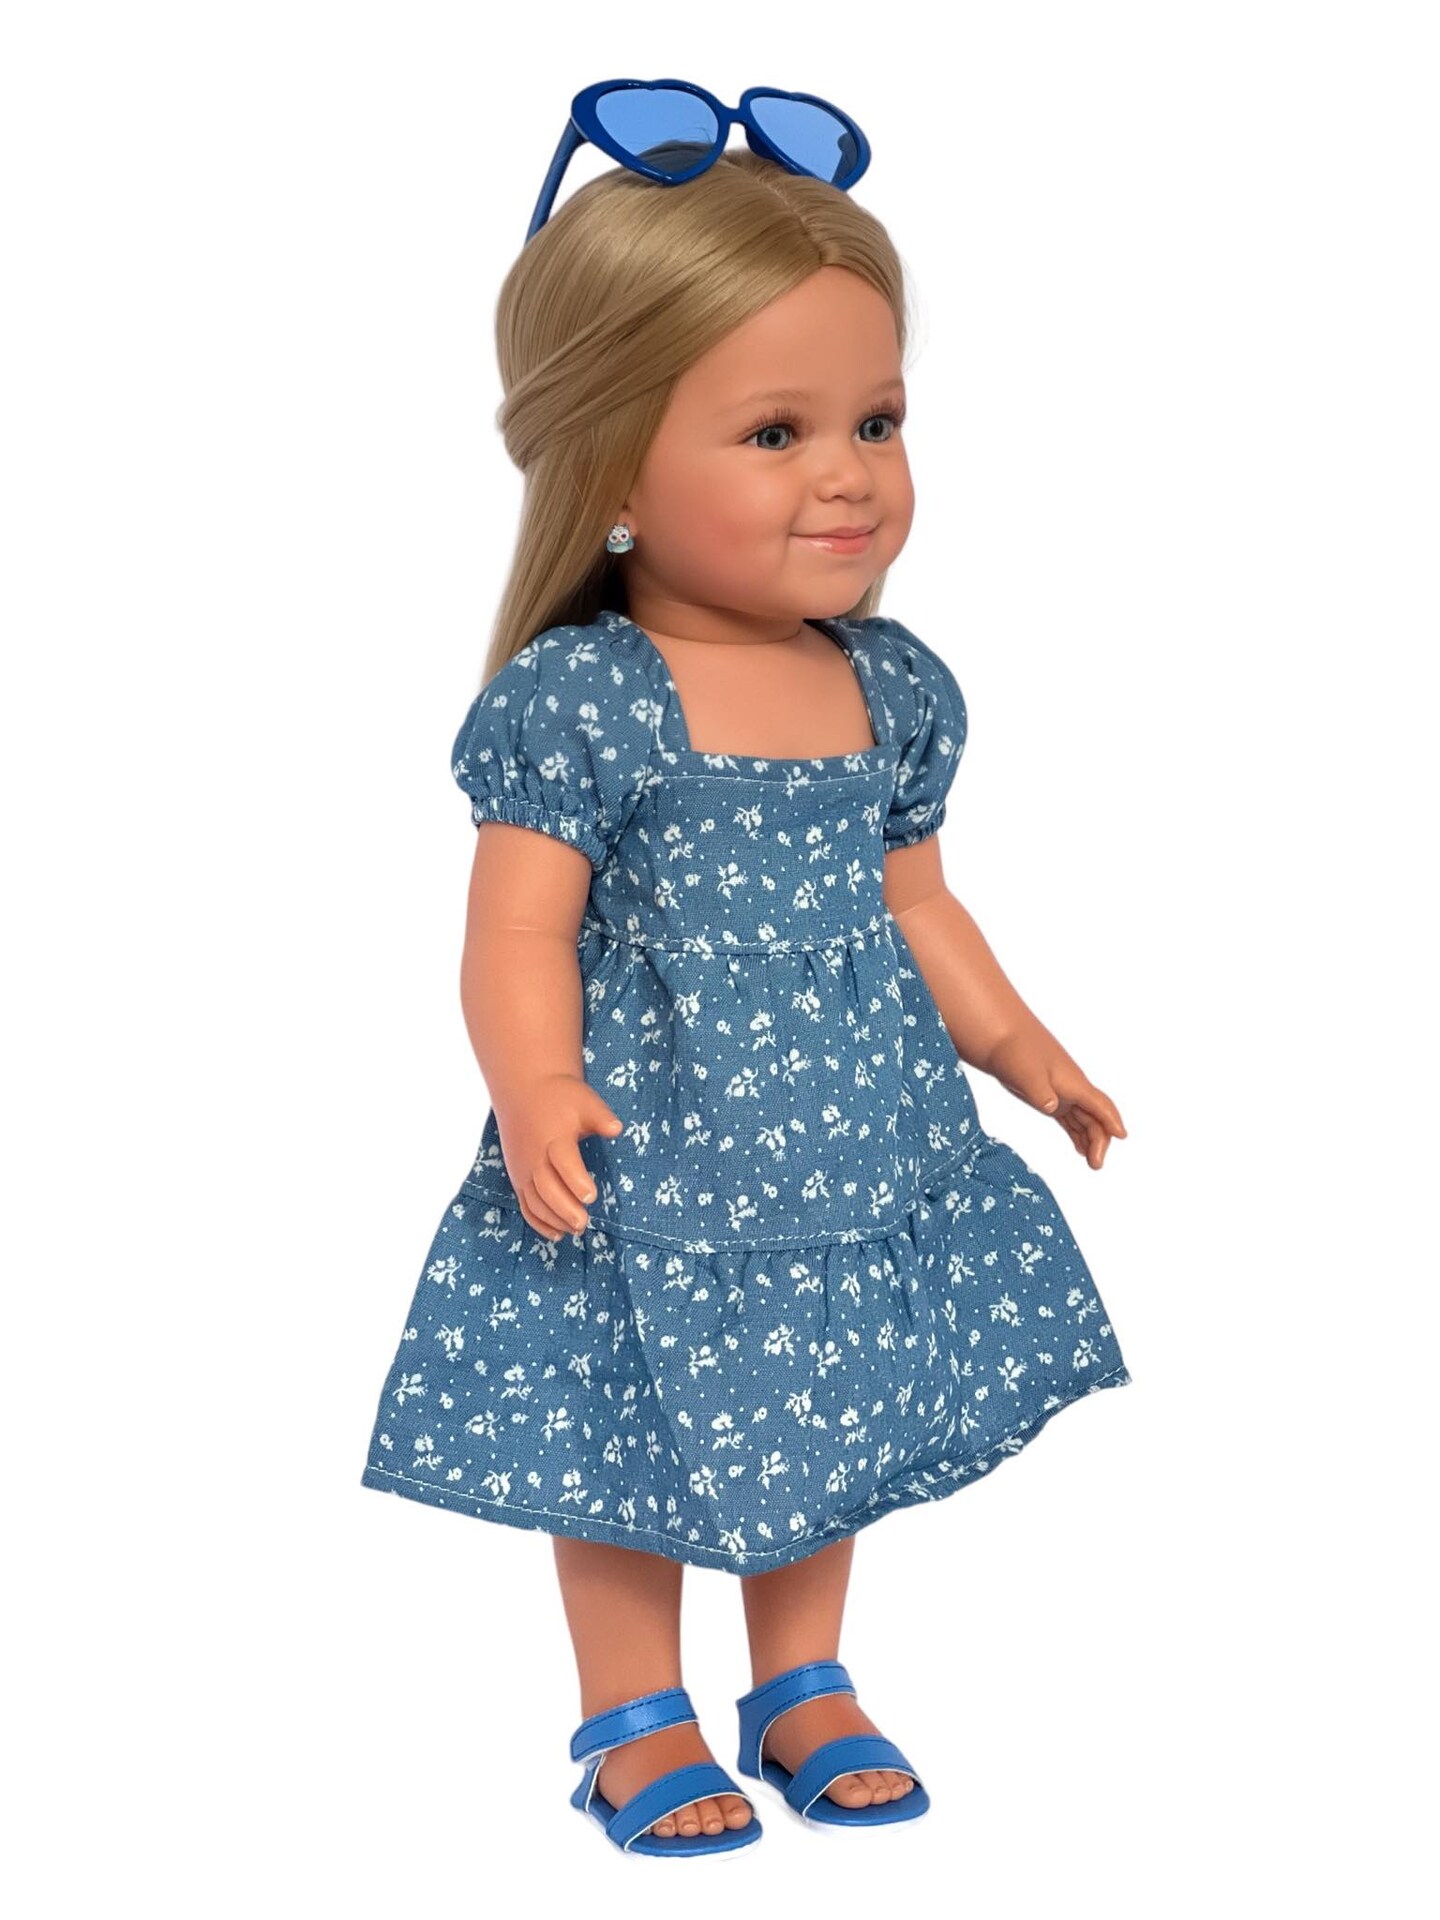 MBD Denim Maxi Dress for 18 Inch Kennedy and Friends Dolls and all Other 18 Inch Fashion Girl Doll-Complete Outfit with Sandals and Glasses